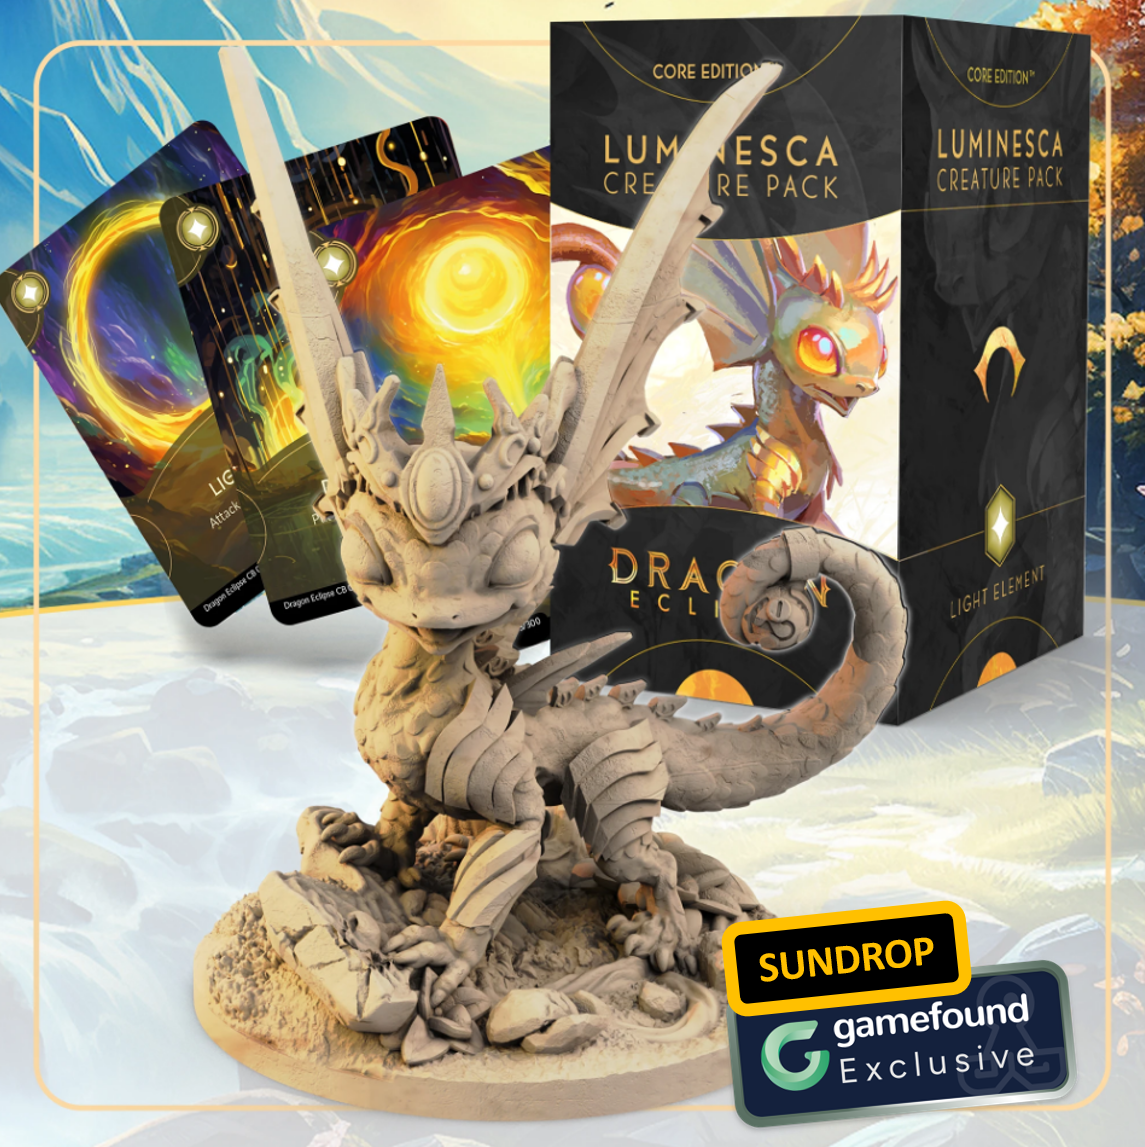 Gamefound Exclusive Dragon Eclipse Board Game Luminesca Creature Pack Expansion, Sundrop Edition